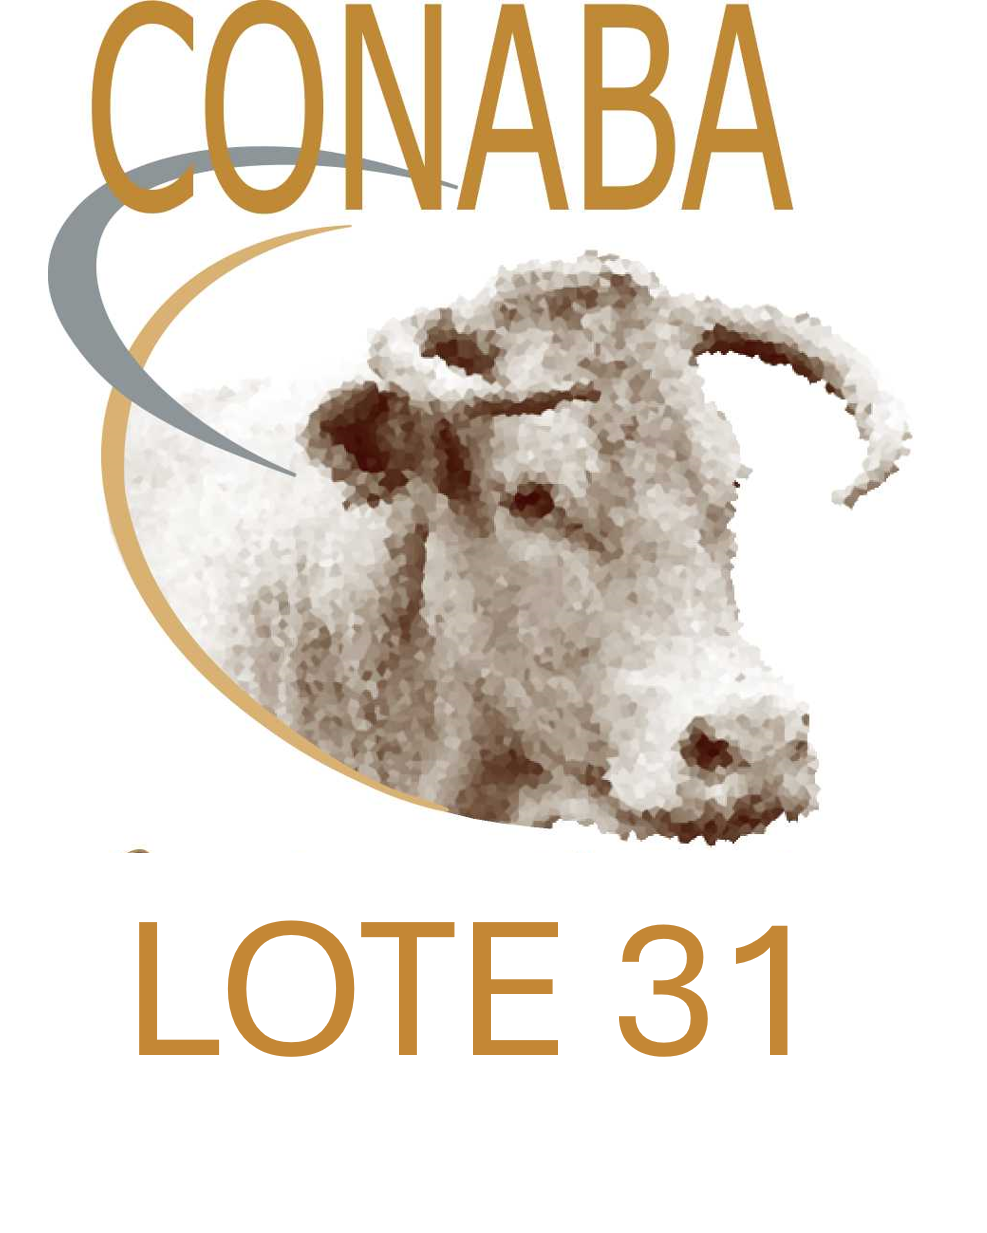 LOTE 31